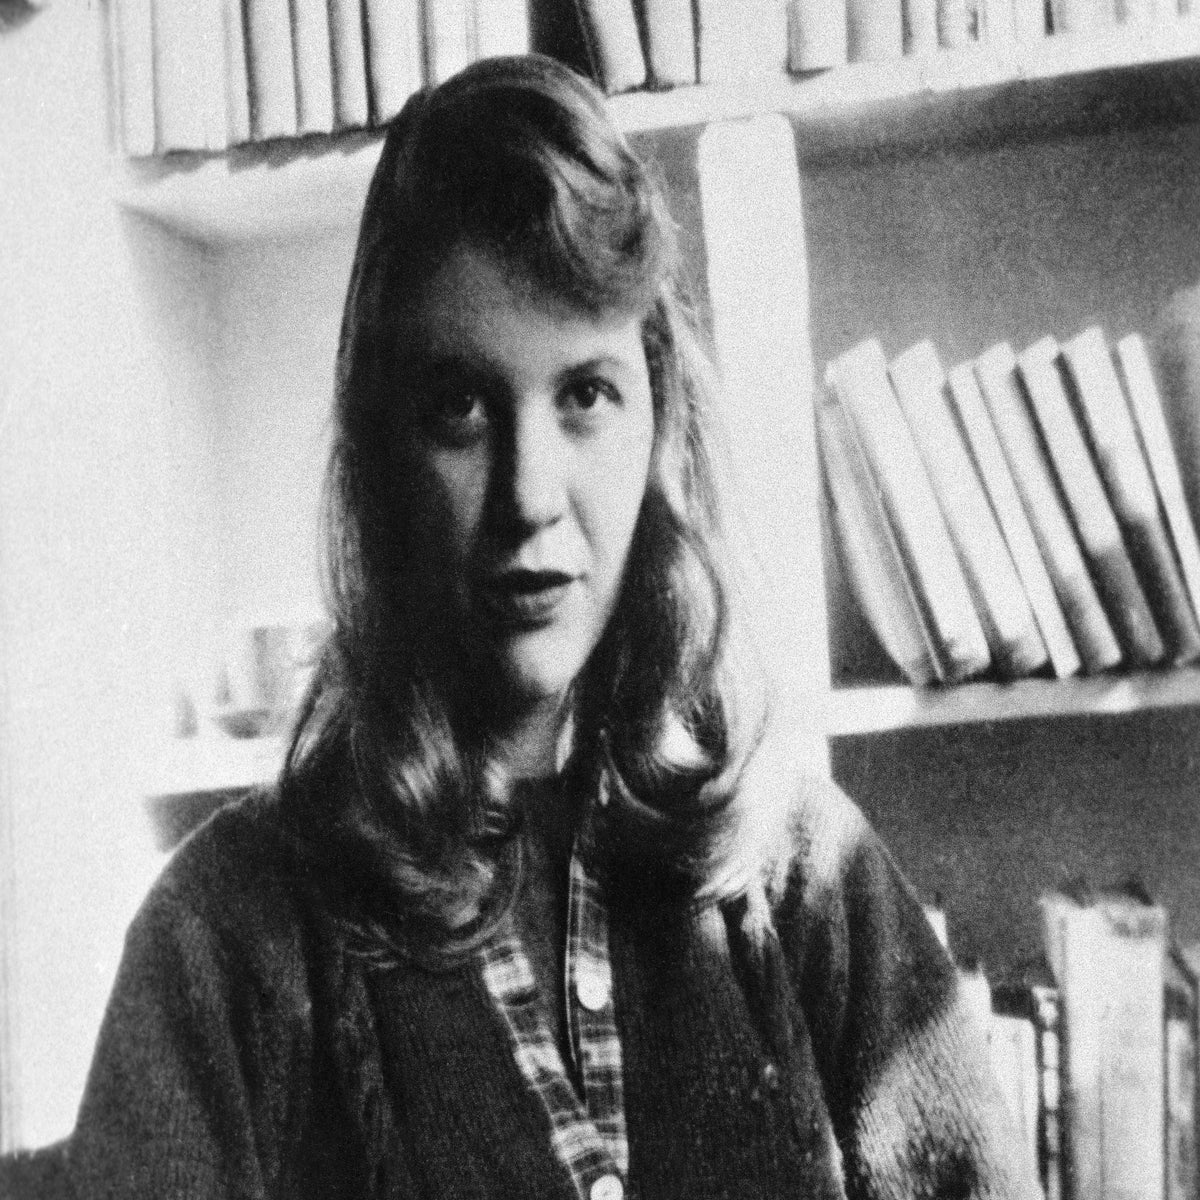 Sylvia Plath: Unseen short story to be published by Faber in January 2019, The Independent